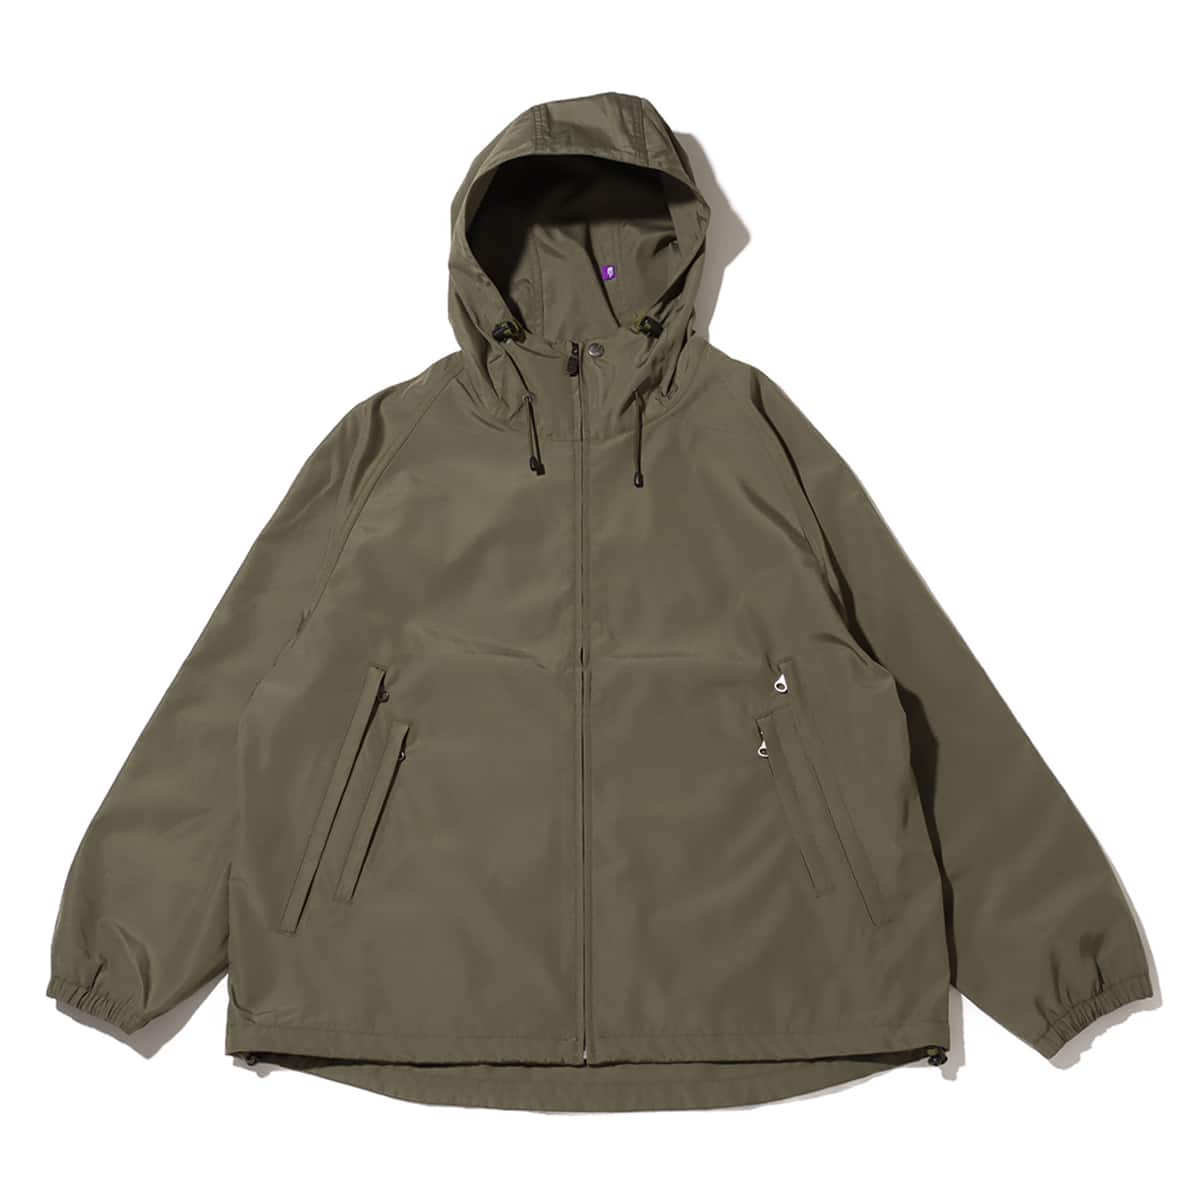 THE NORTH FACE PURPLE LABEL◇[未使用]Mountain Wind Parka/ナイロン 